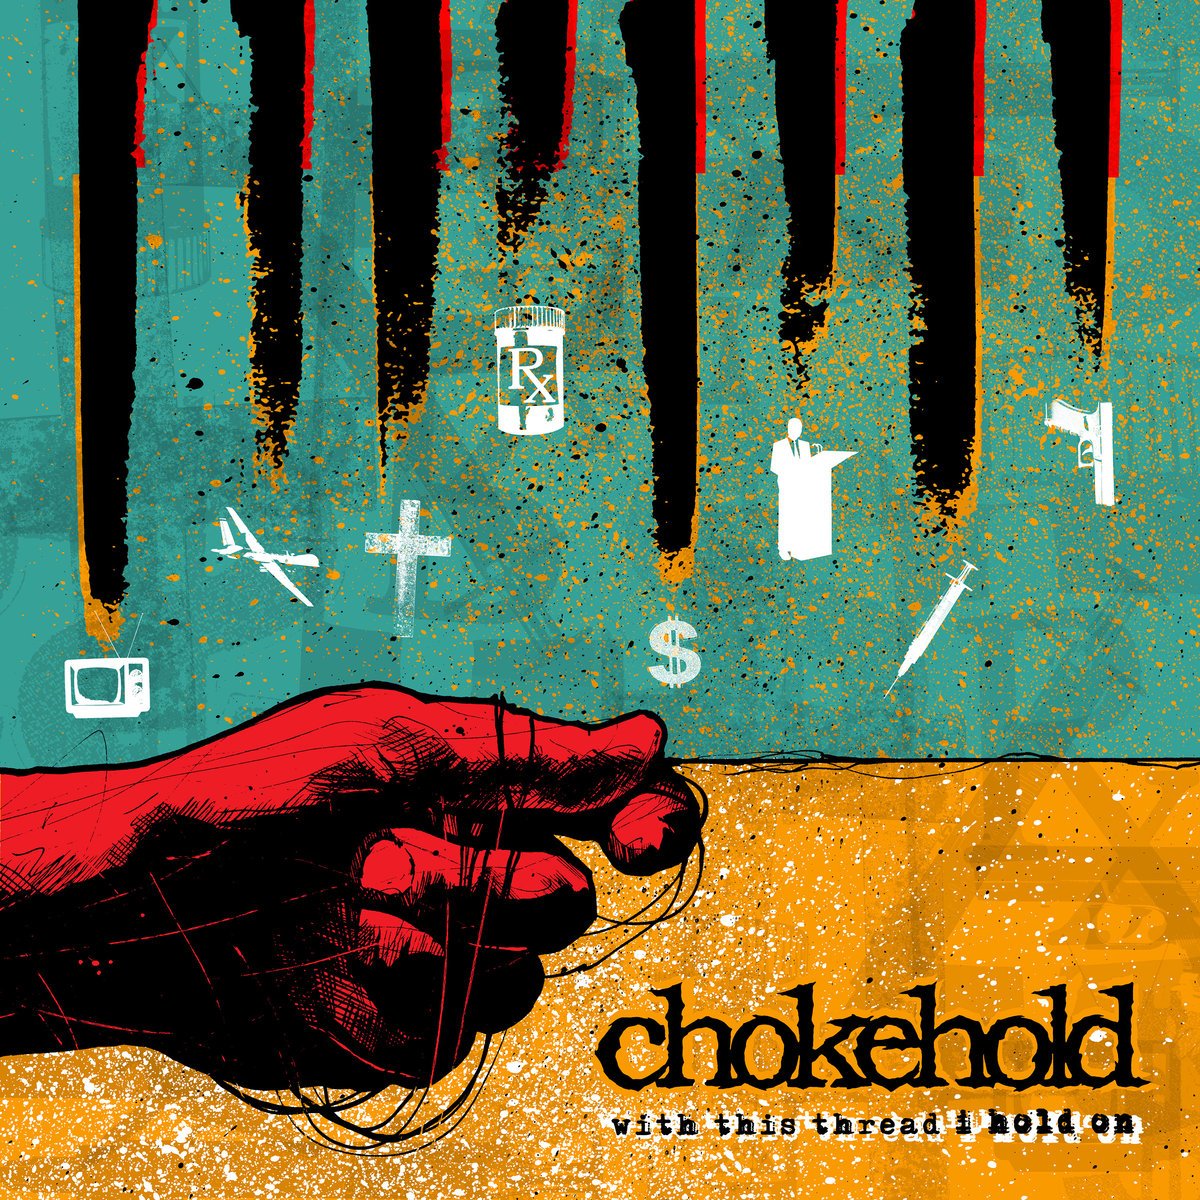 Chokehold - With This Thread I Hold On (2019) FLAC Download